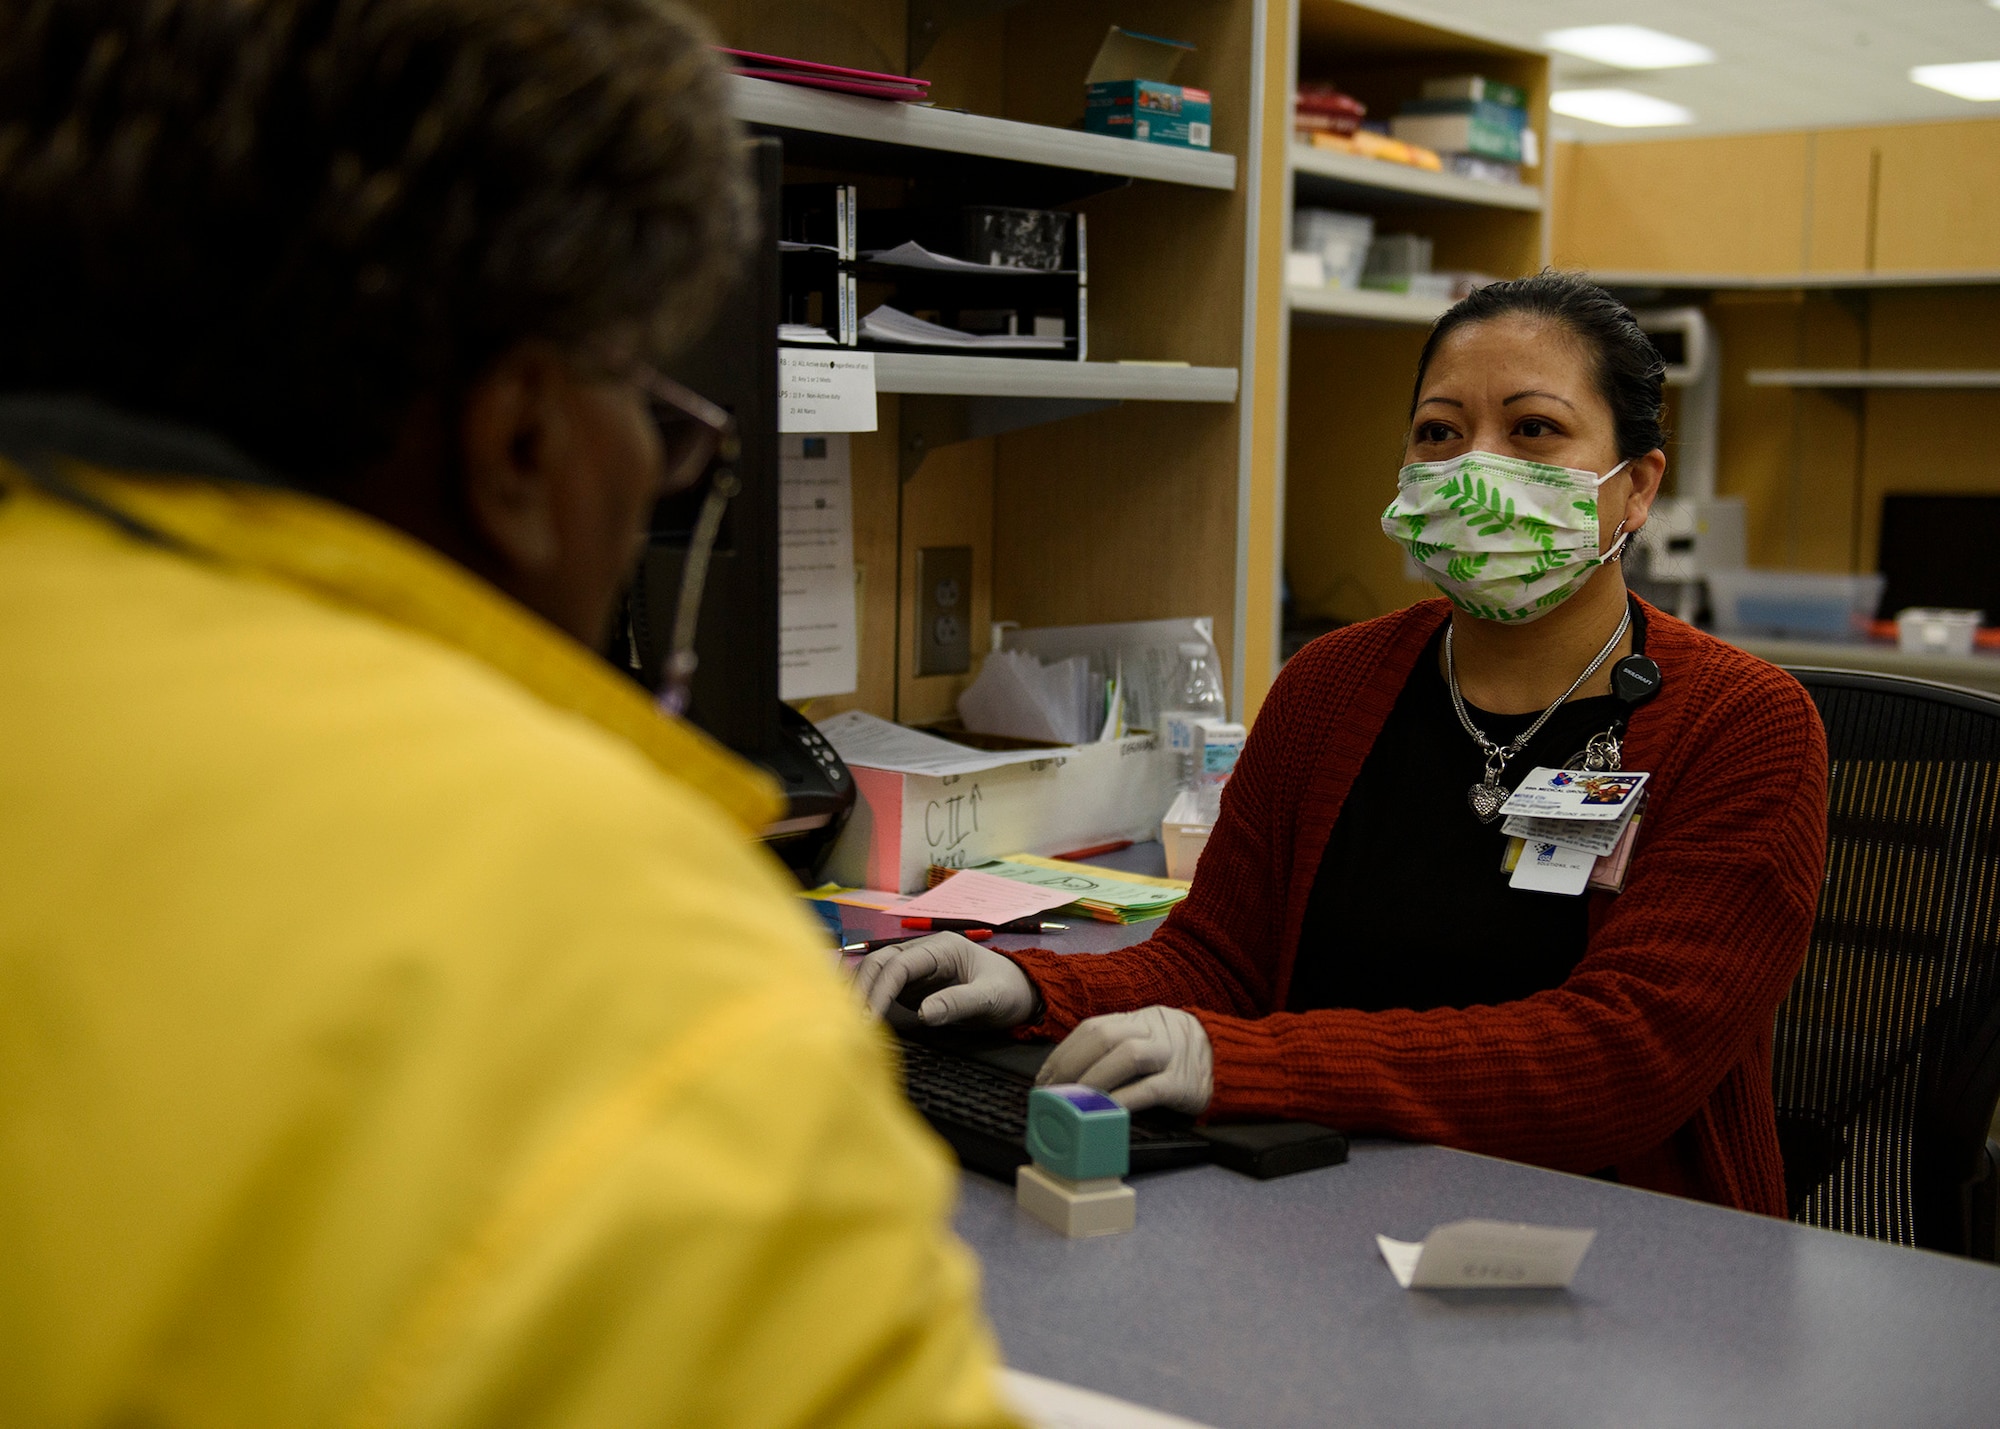 A pharmacist technician speaks for a patient at a desk.